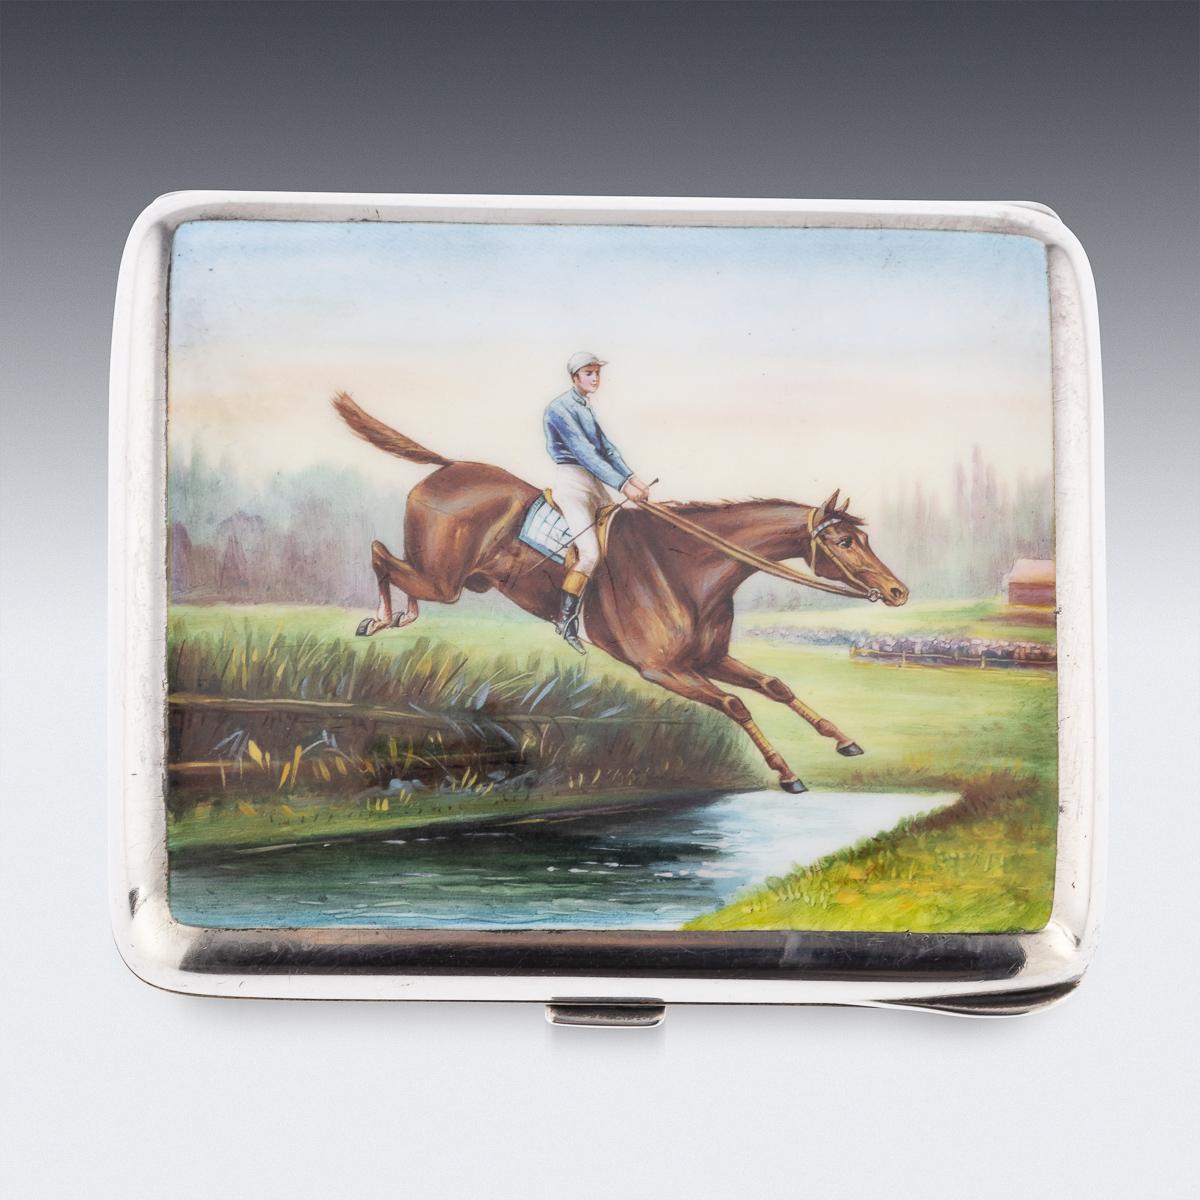 20th Century German Solid Silver & Enamel Cigarette Case, c.1904 In Good Condition For Sale In Royal Tunbridge Wells, Kent